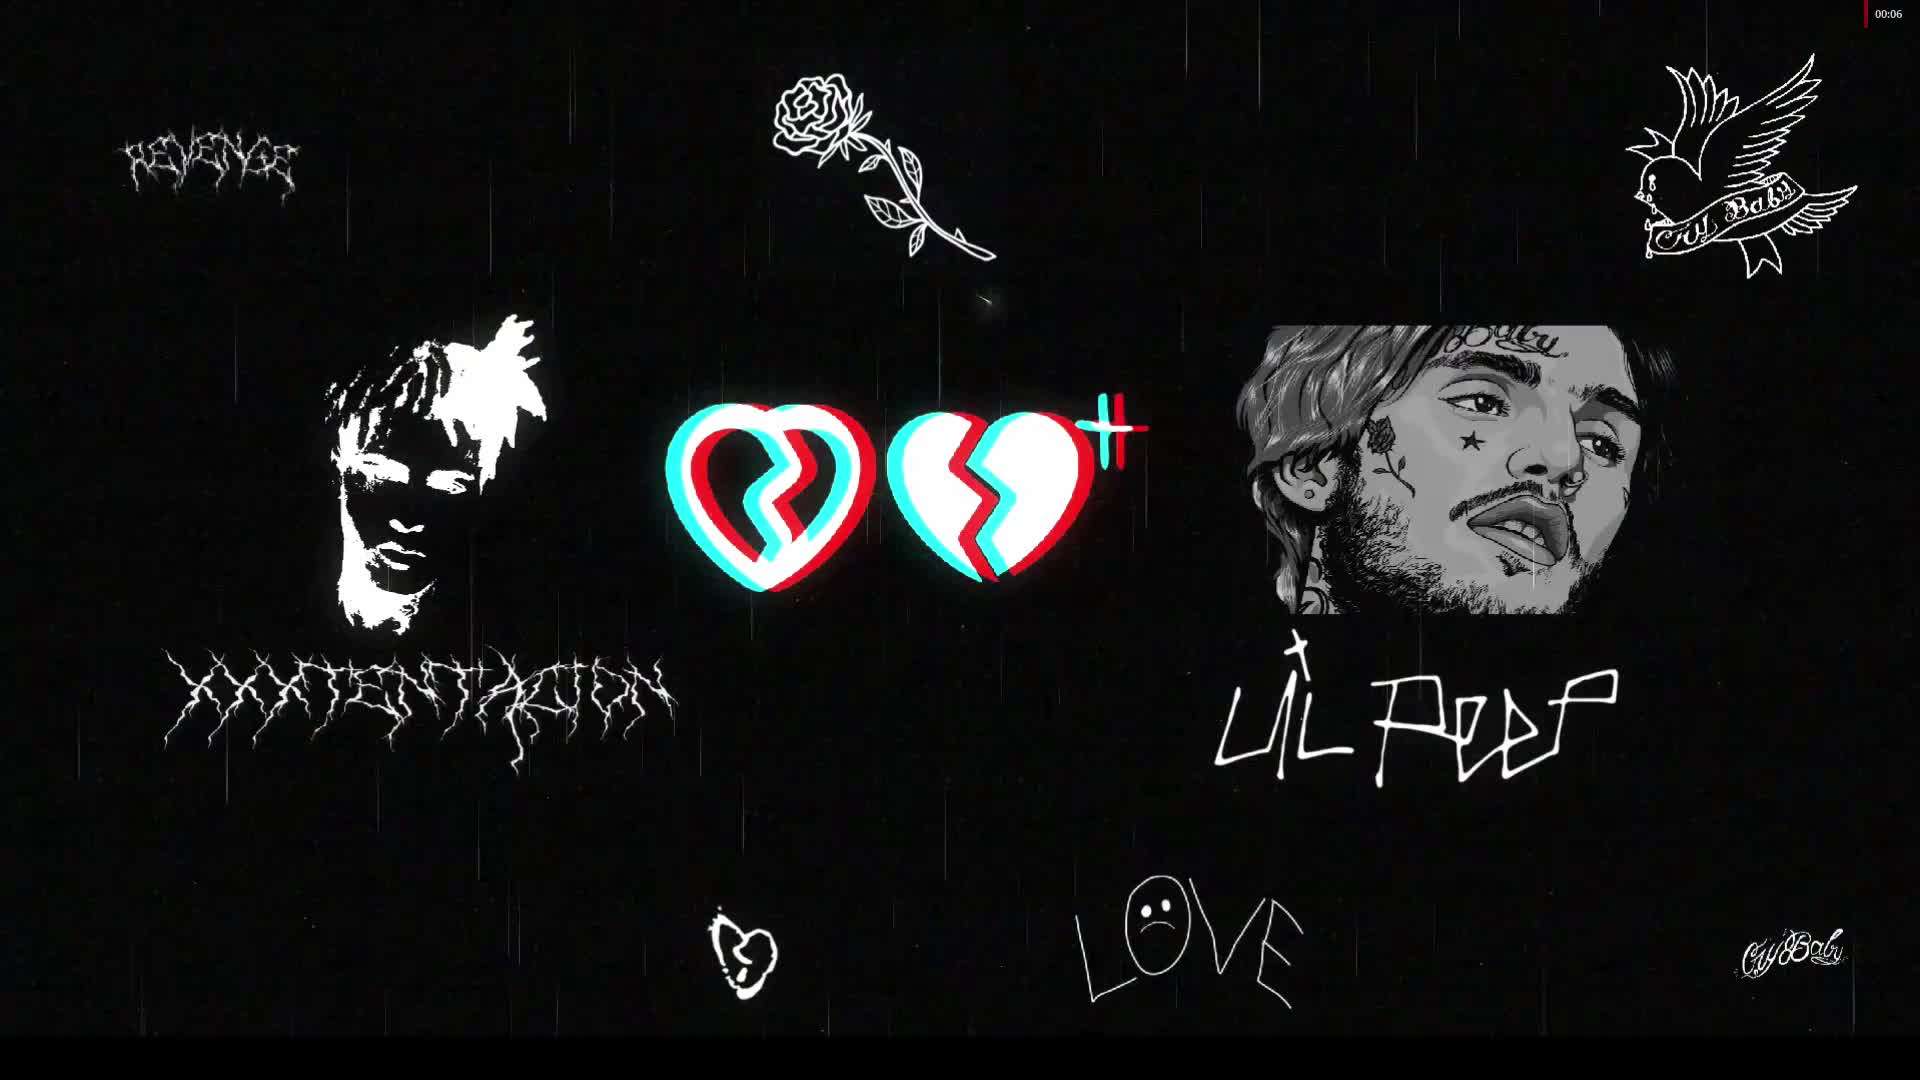 Lil Peep wallpapers for desktop, download free Lil Peep pictures and  backgrounds for PC | mob.org